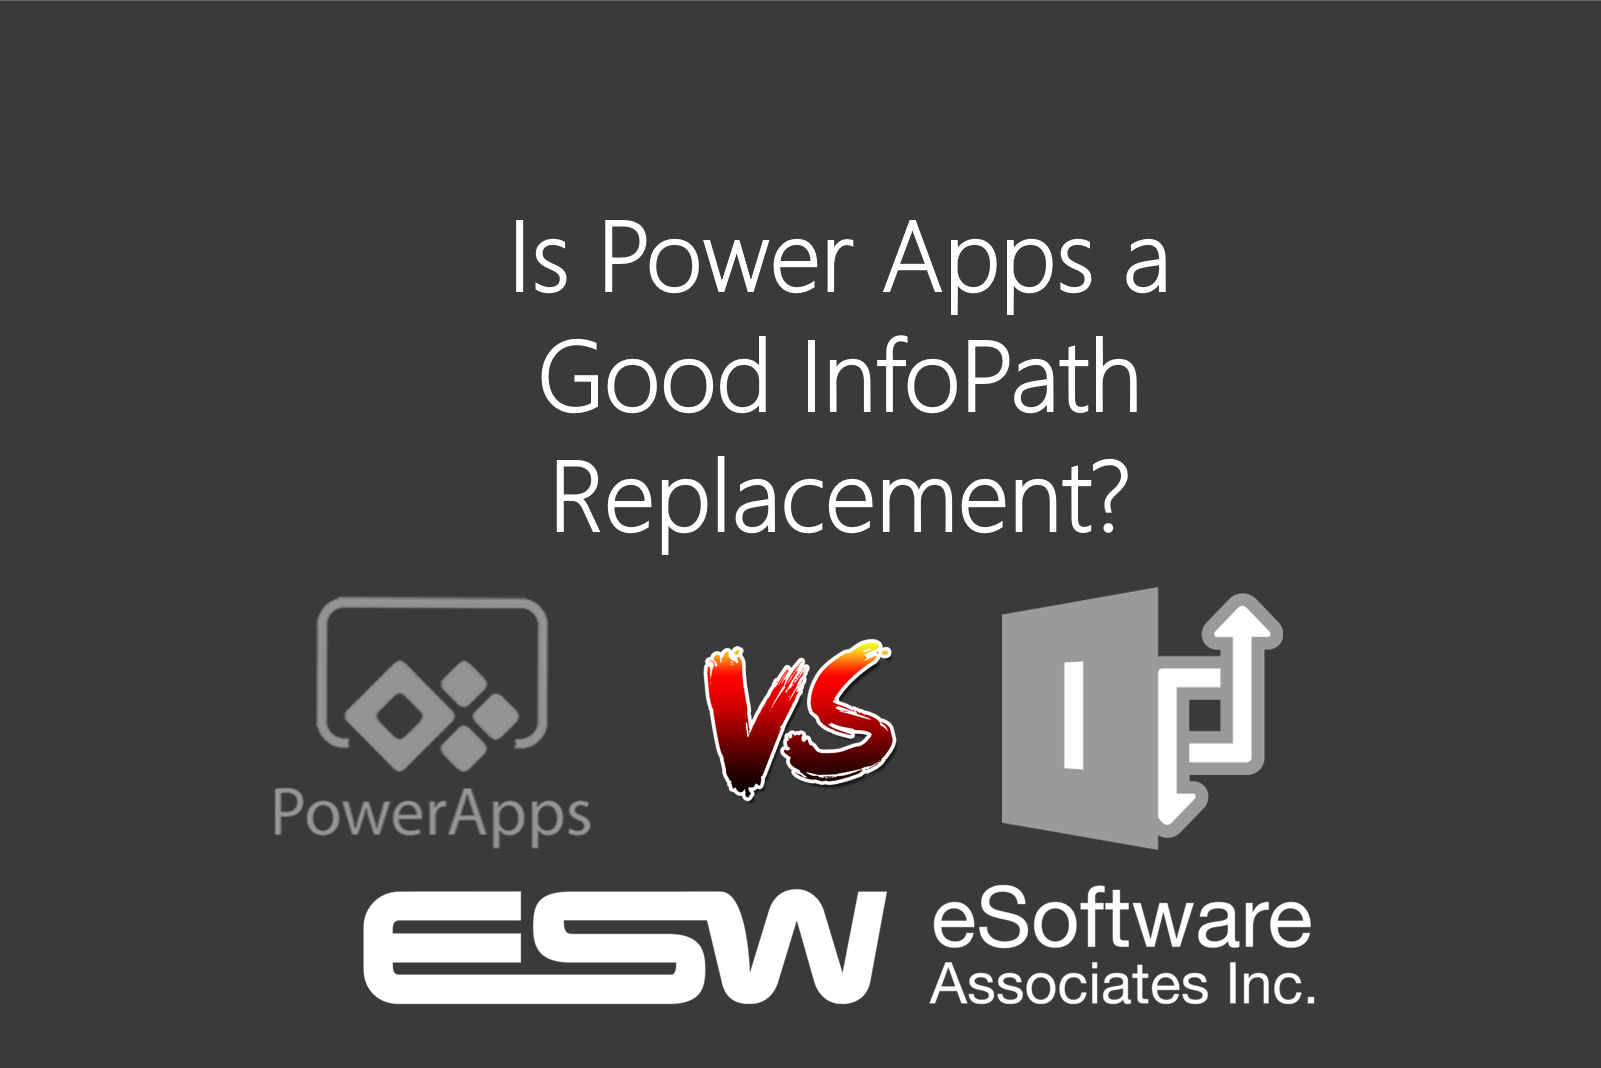 Learn if Microsoft Power Apps a Good InfoPath Replacement